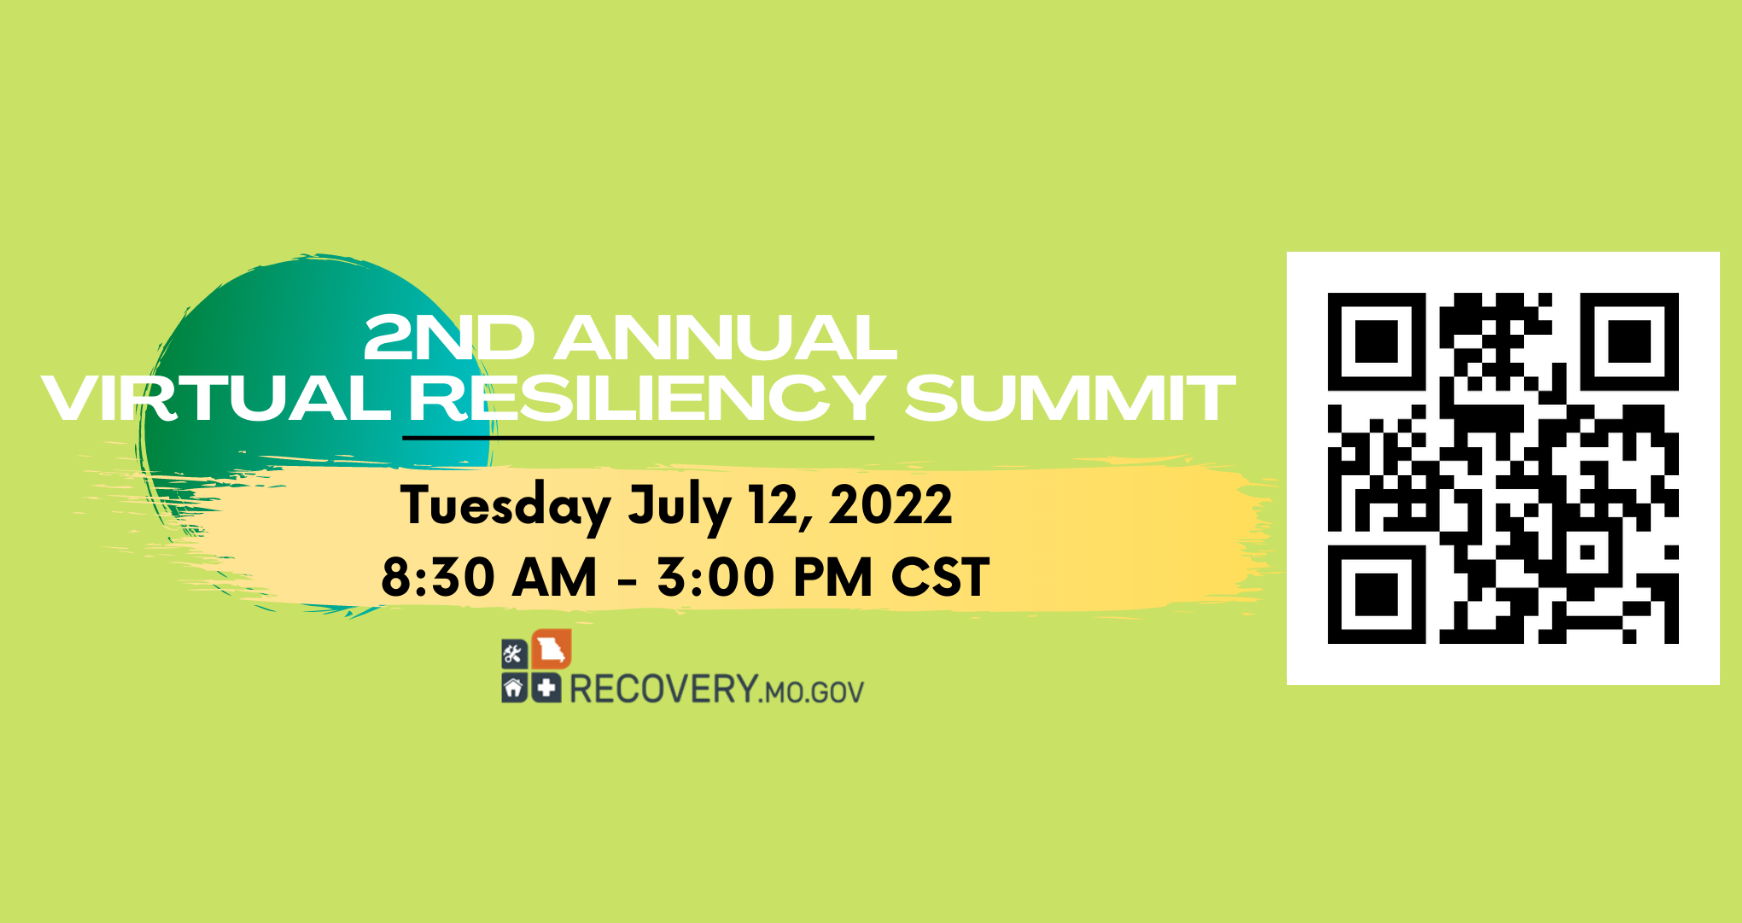 2nd Annual Resiliency Summit registration 